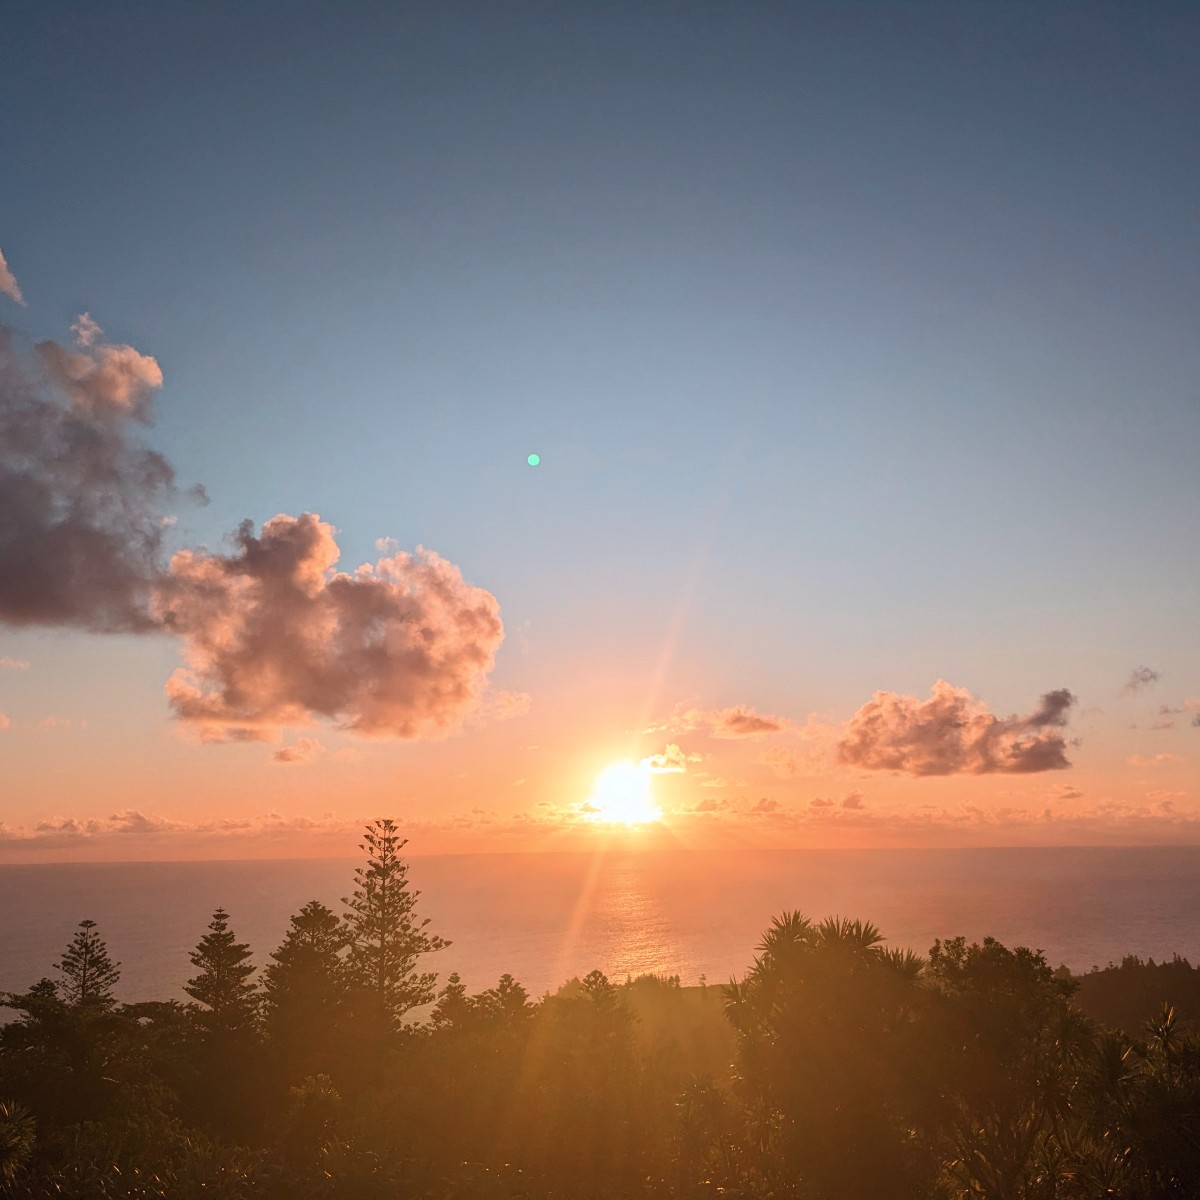 What a beautiful sunset from the summit of Mt Pitt ! 😍🌄 Happy #SunsetSaturday from Norfolk Island National Park and Botanic Garden!